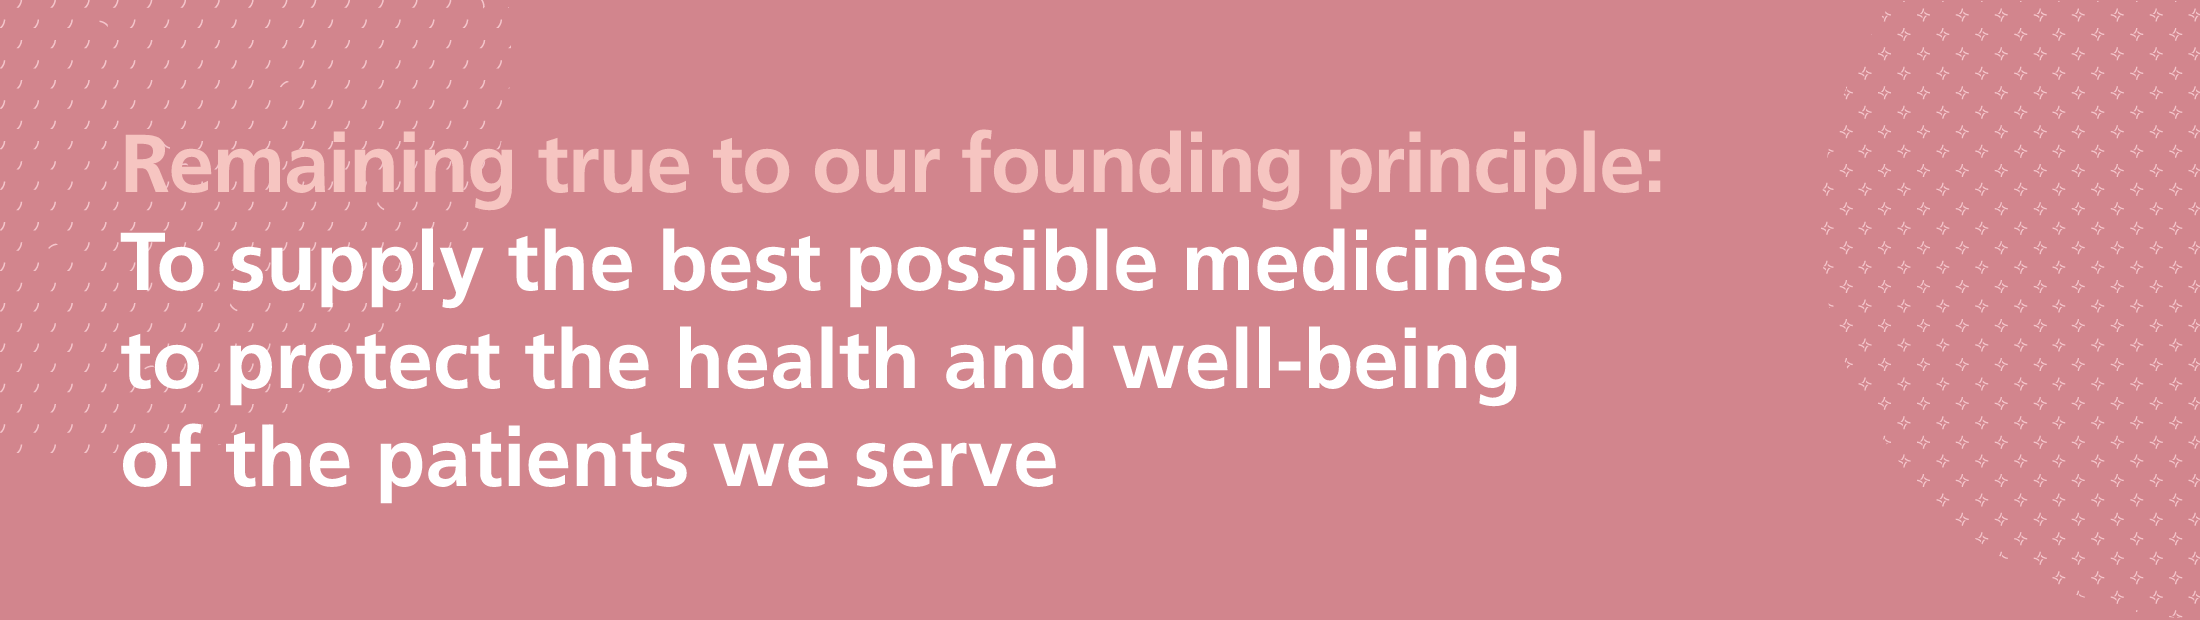 Remaining true to our founding principle: To supply the best possible medicines to protect the health and well-being of the patients we serve